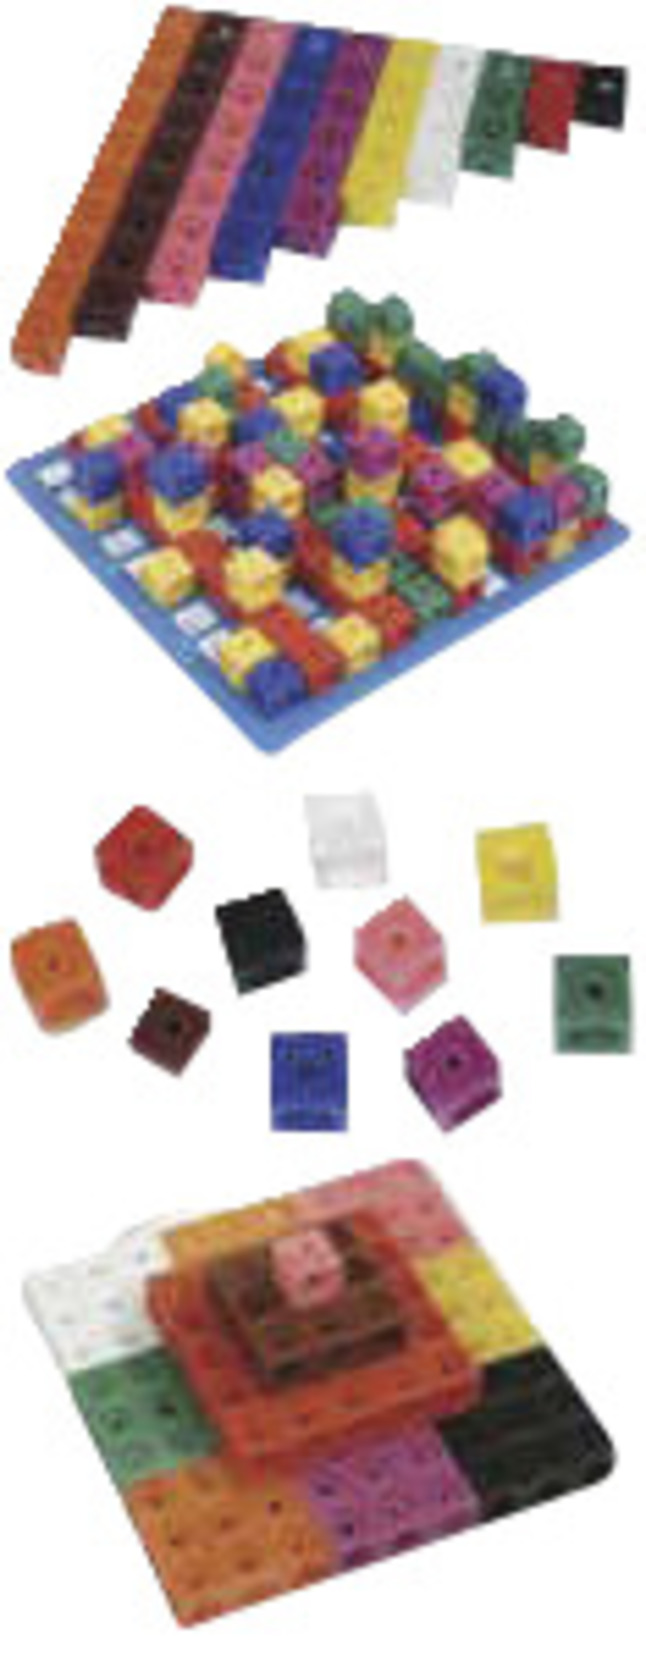 LEARNING RESOURCES MATHLINK CUBES SET OF 100 